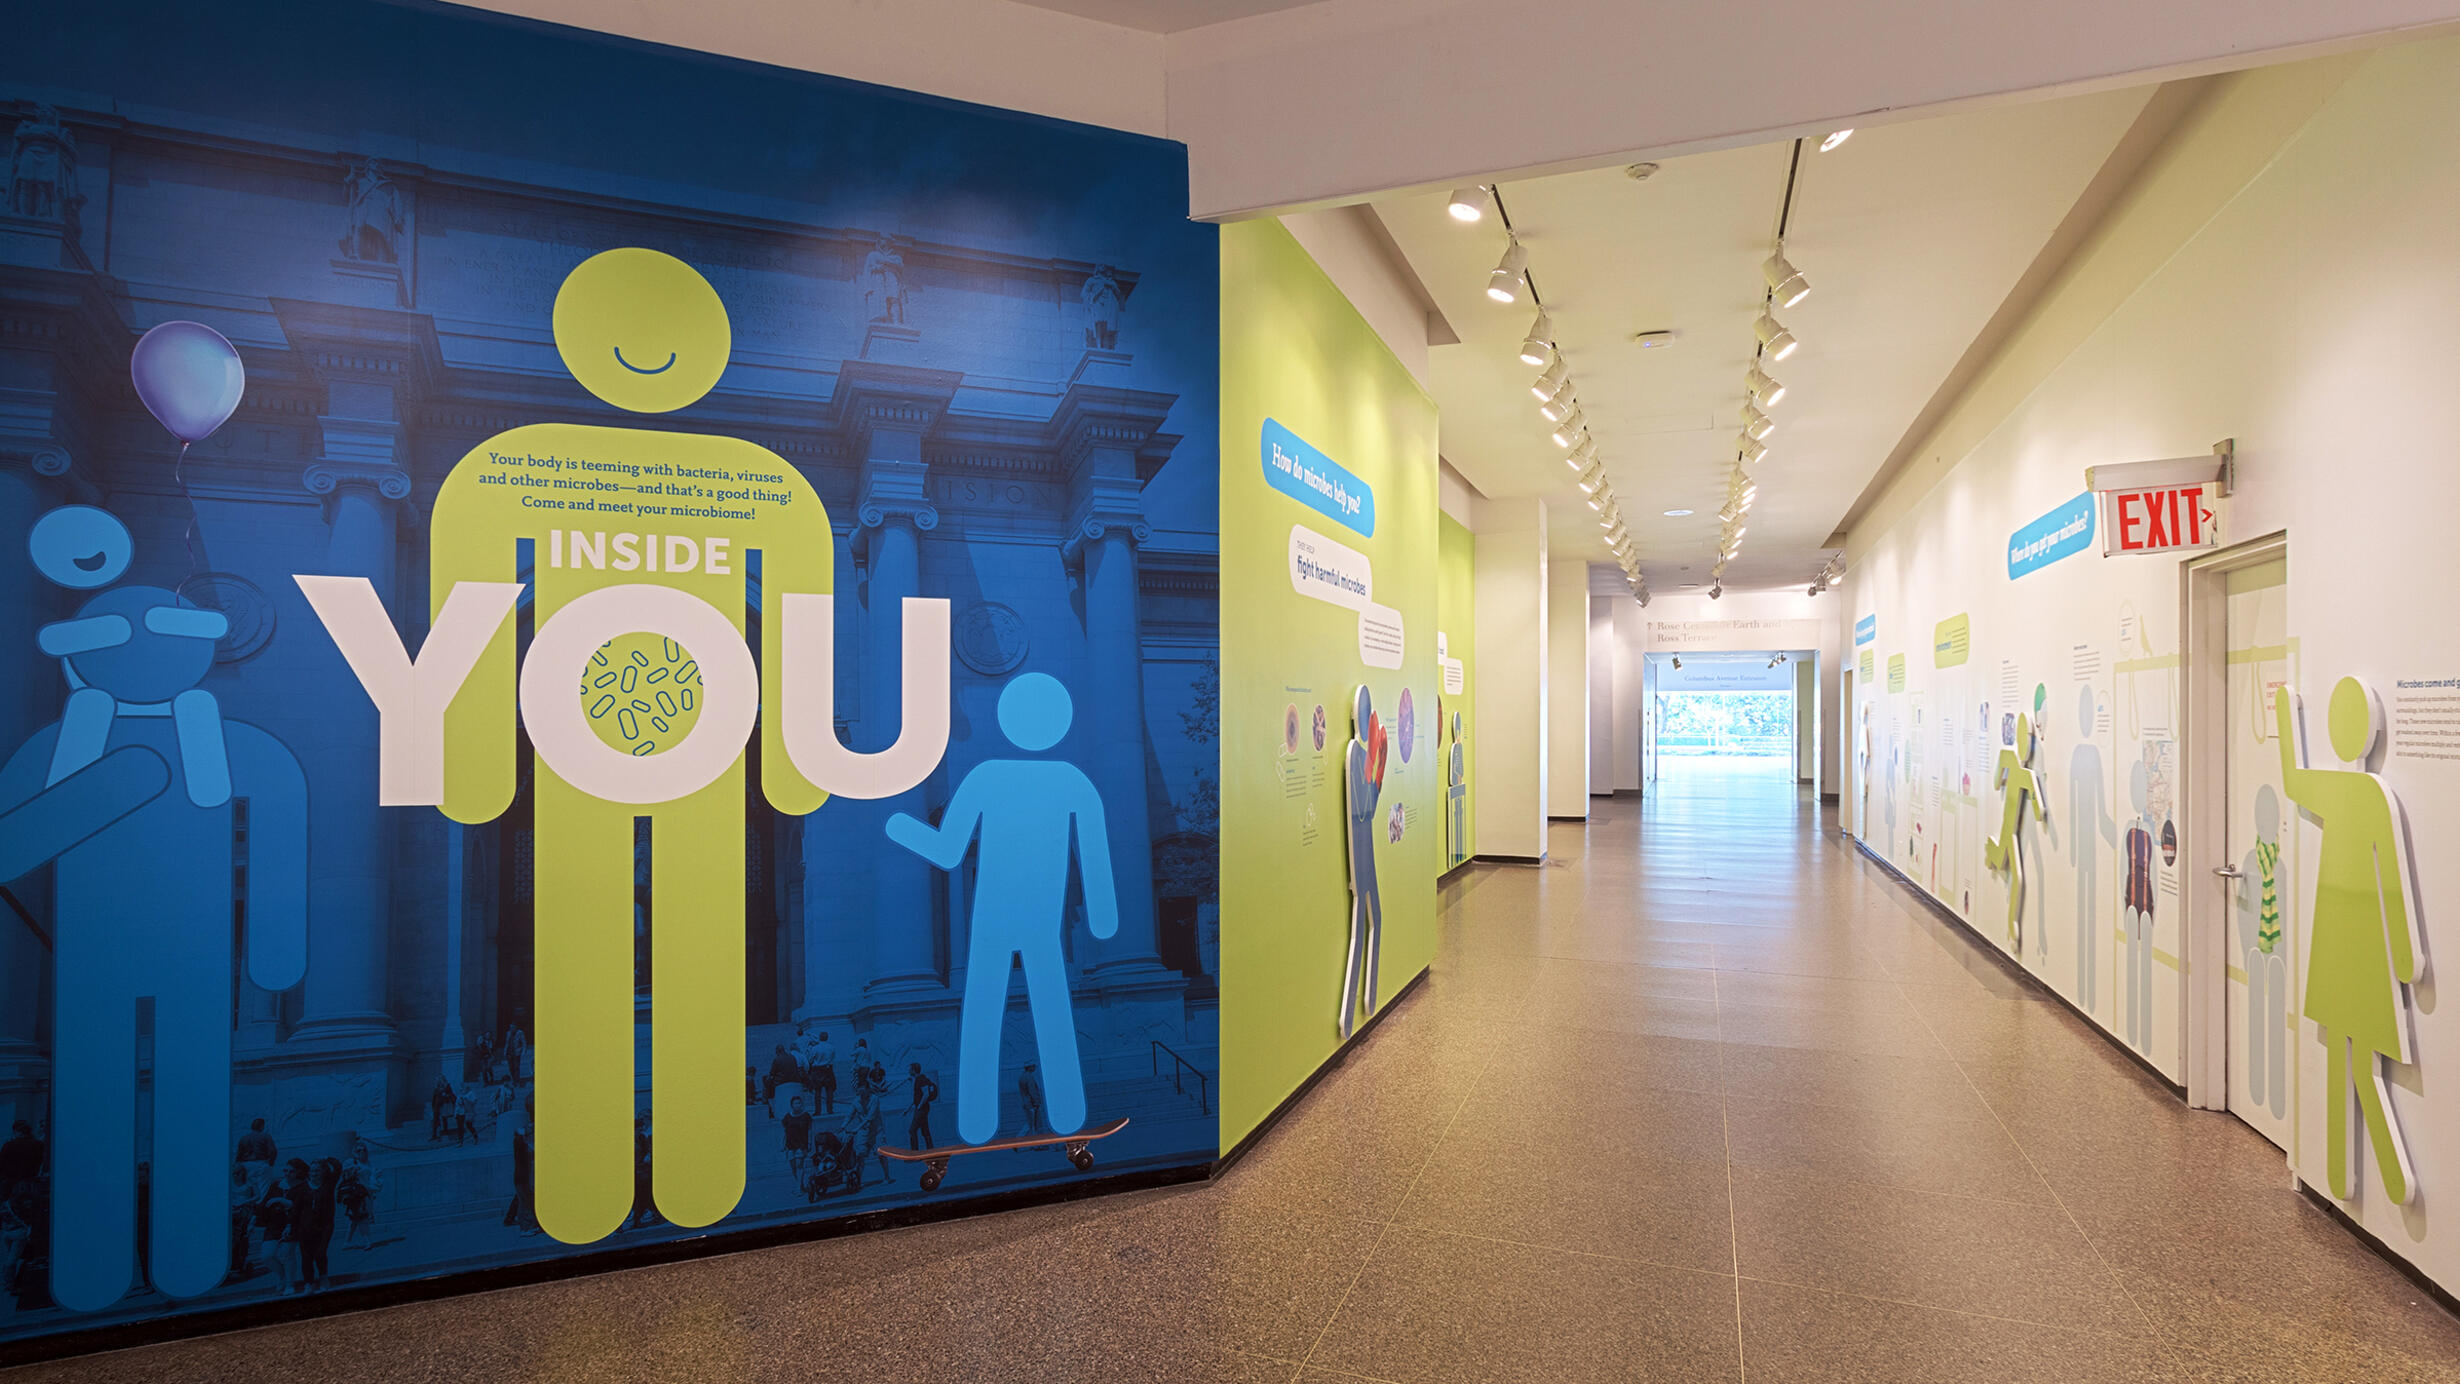 A long hallway is decorated with colorful graphics and text with cutouts shaped like humans